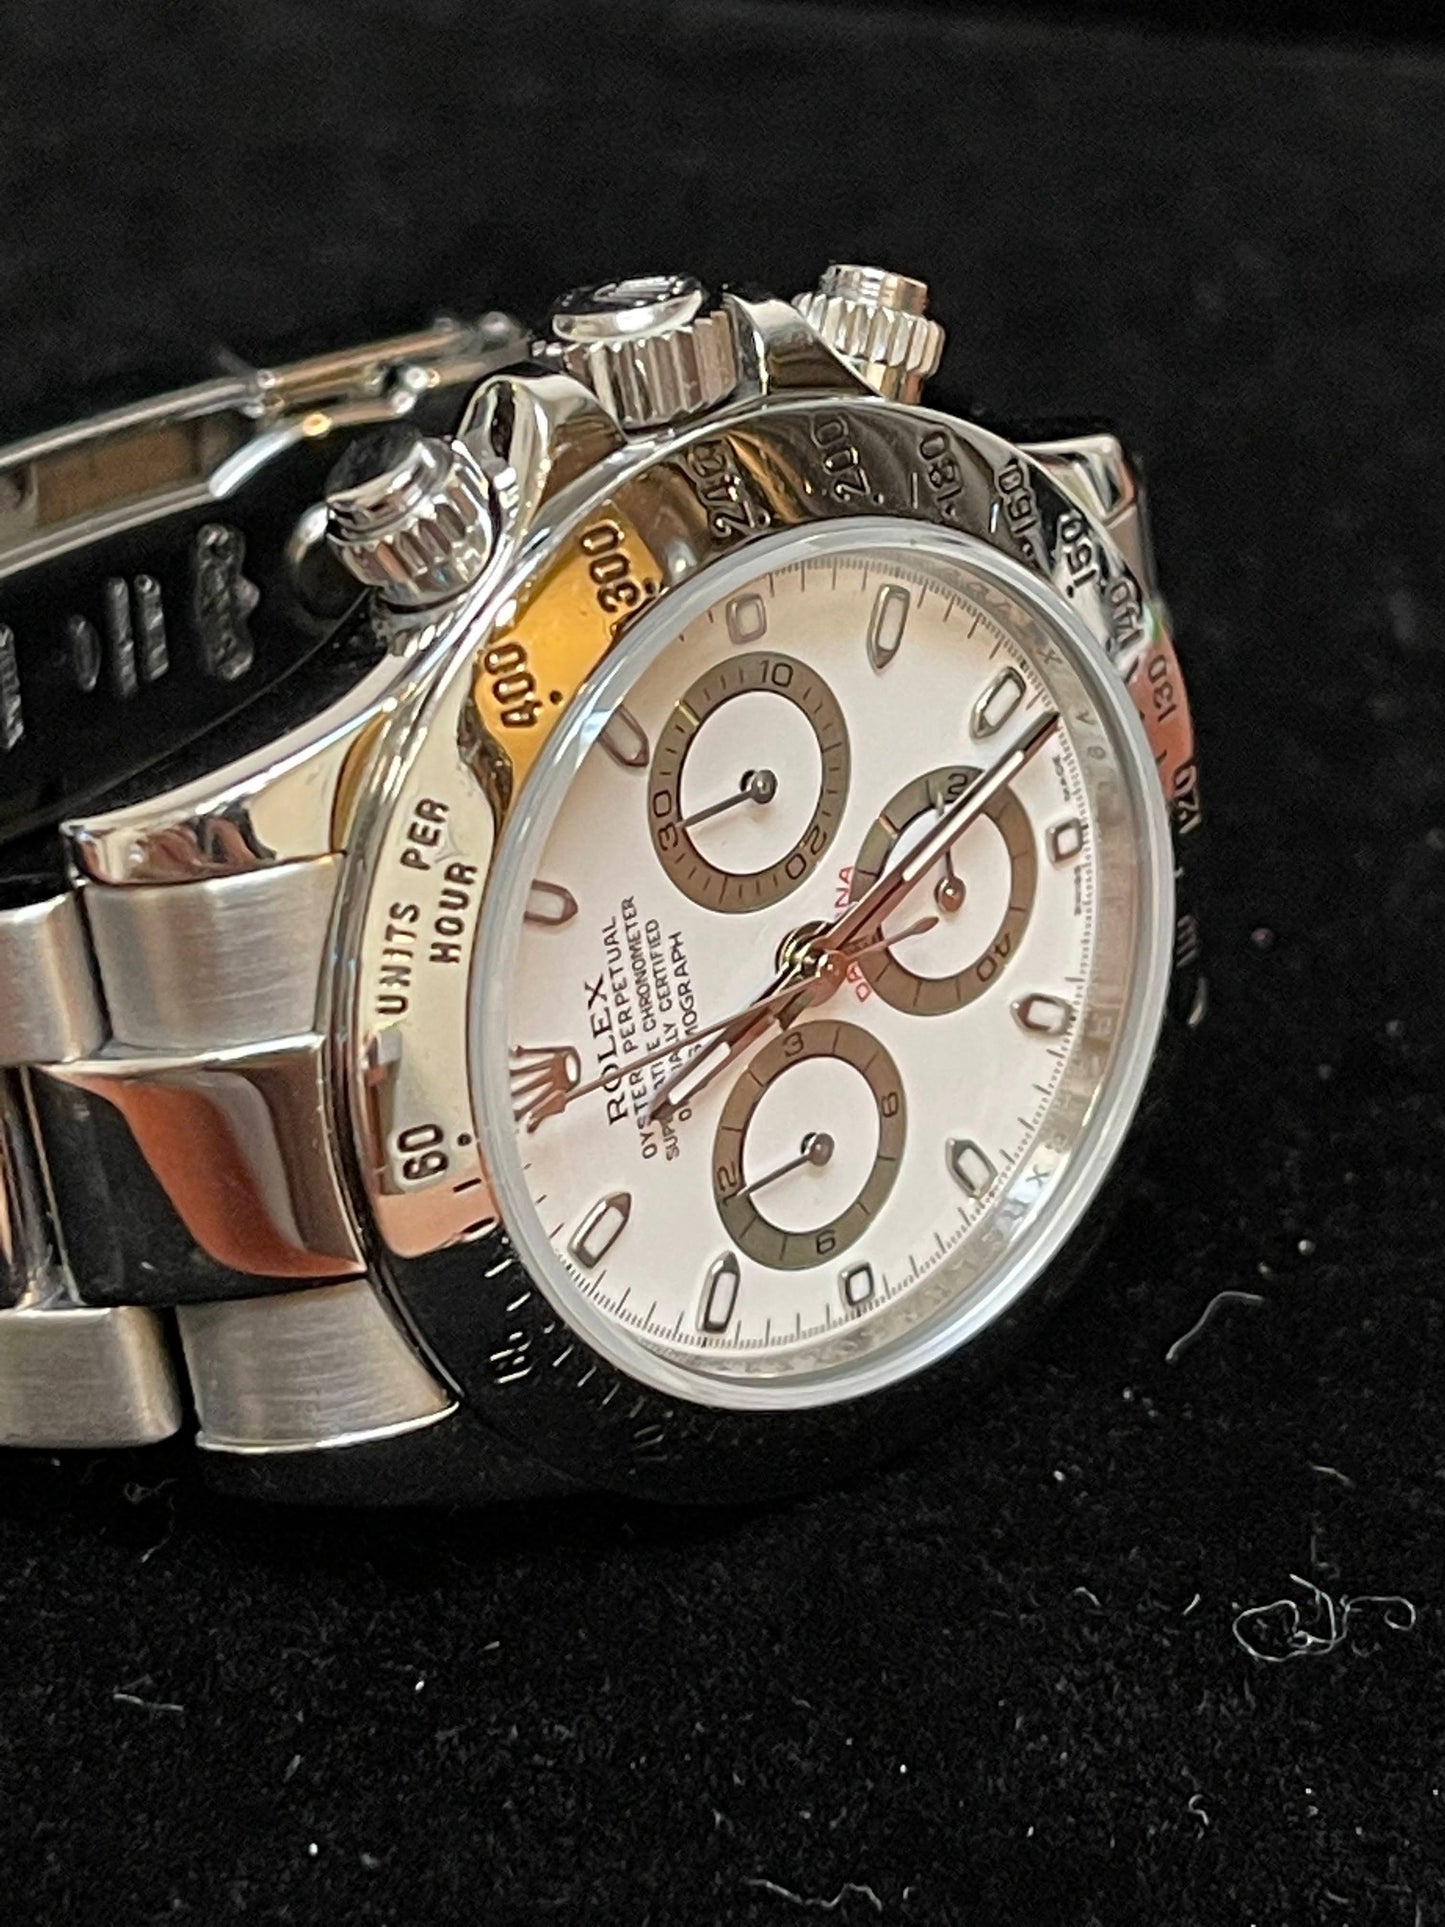 2009 Rolex Daytona 116520 White Dial Oyster Bracelet No Papers 40mm